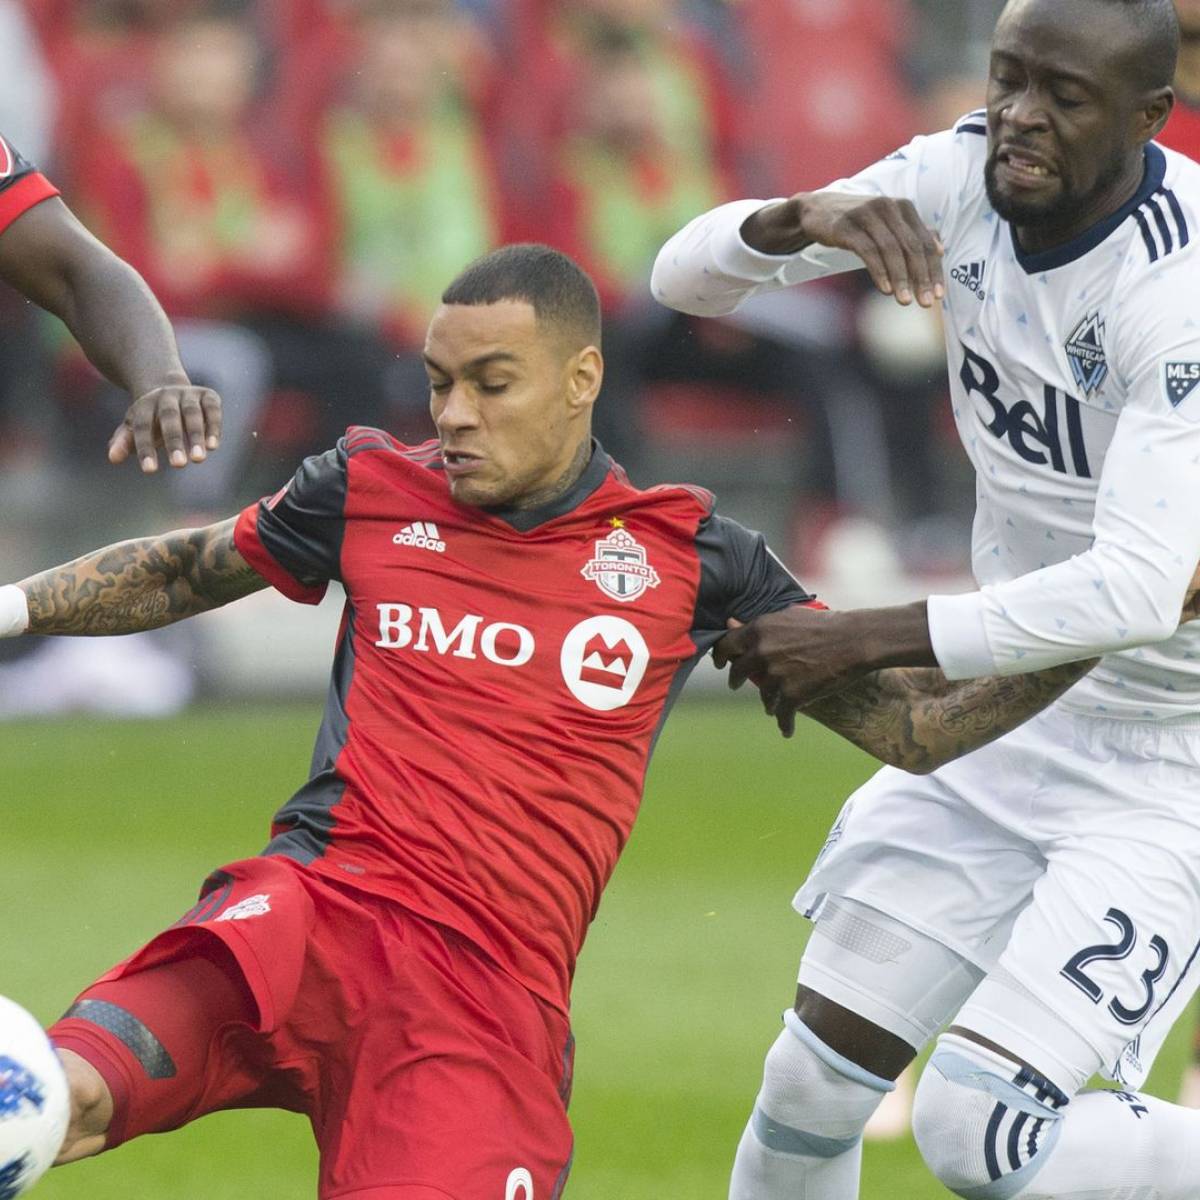 Gregory van der Wiel set to depart Toronto FC after falling-out with Vanney